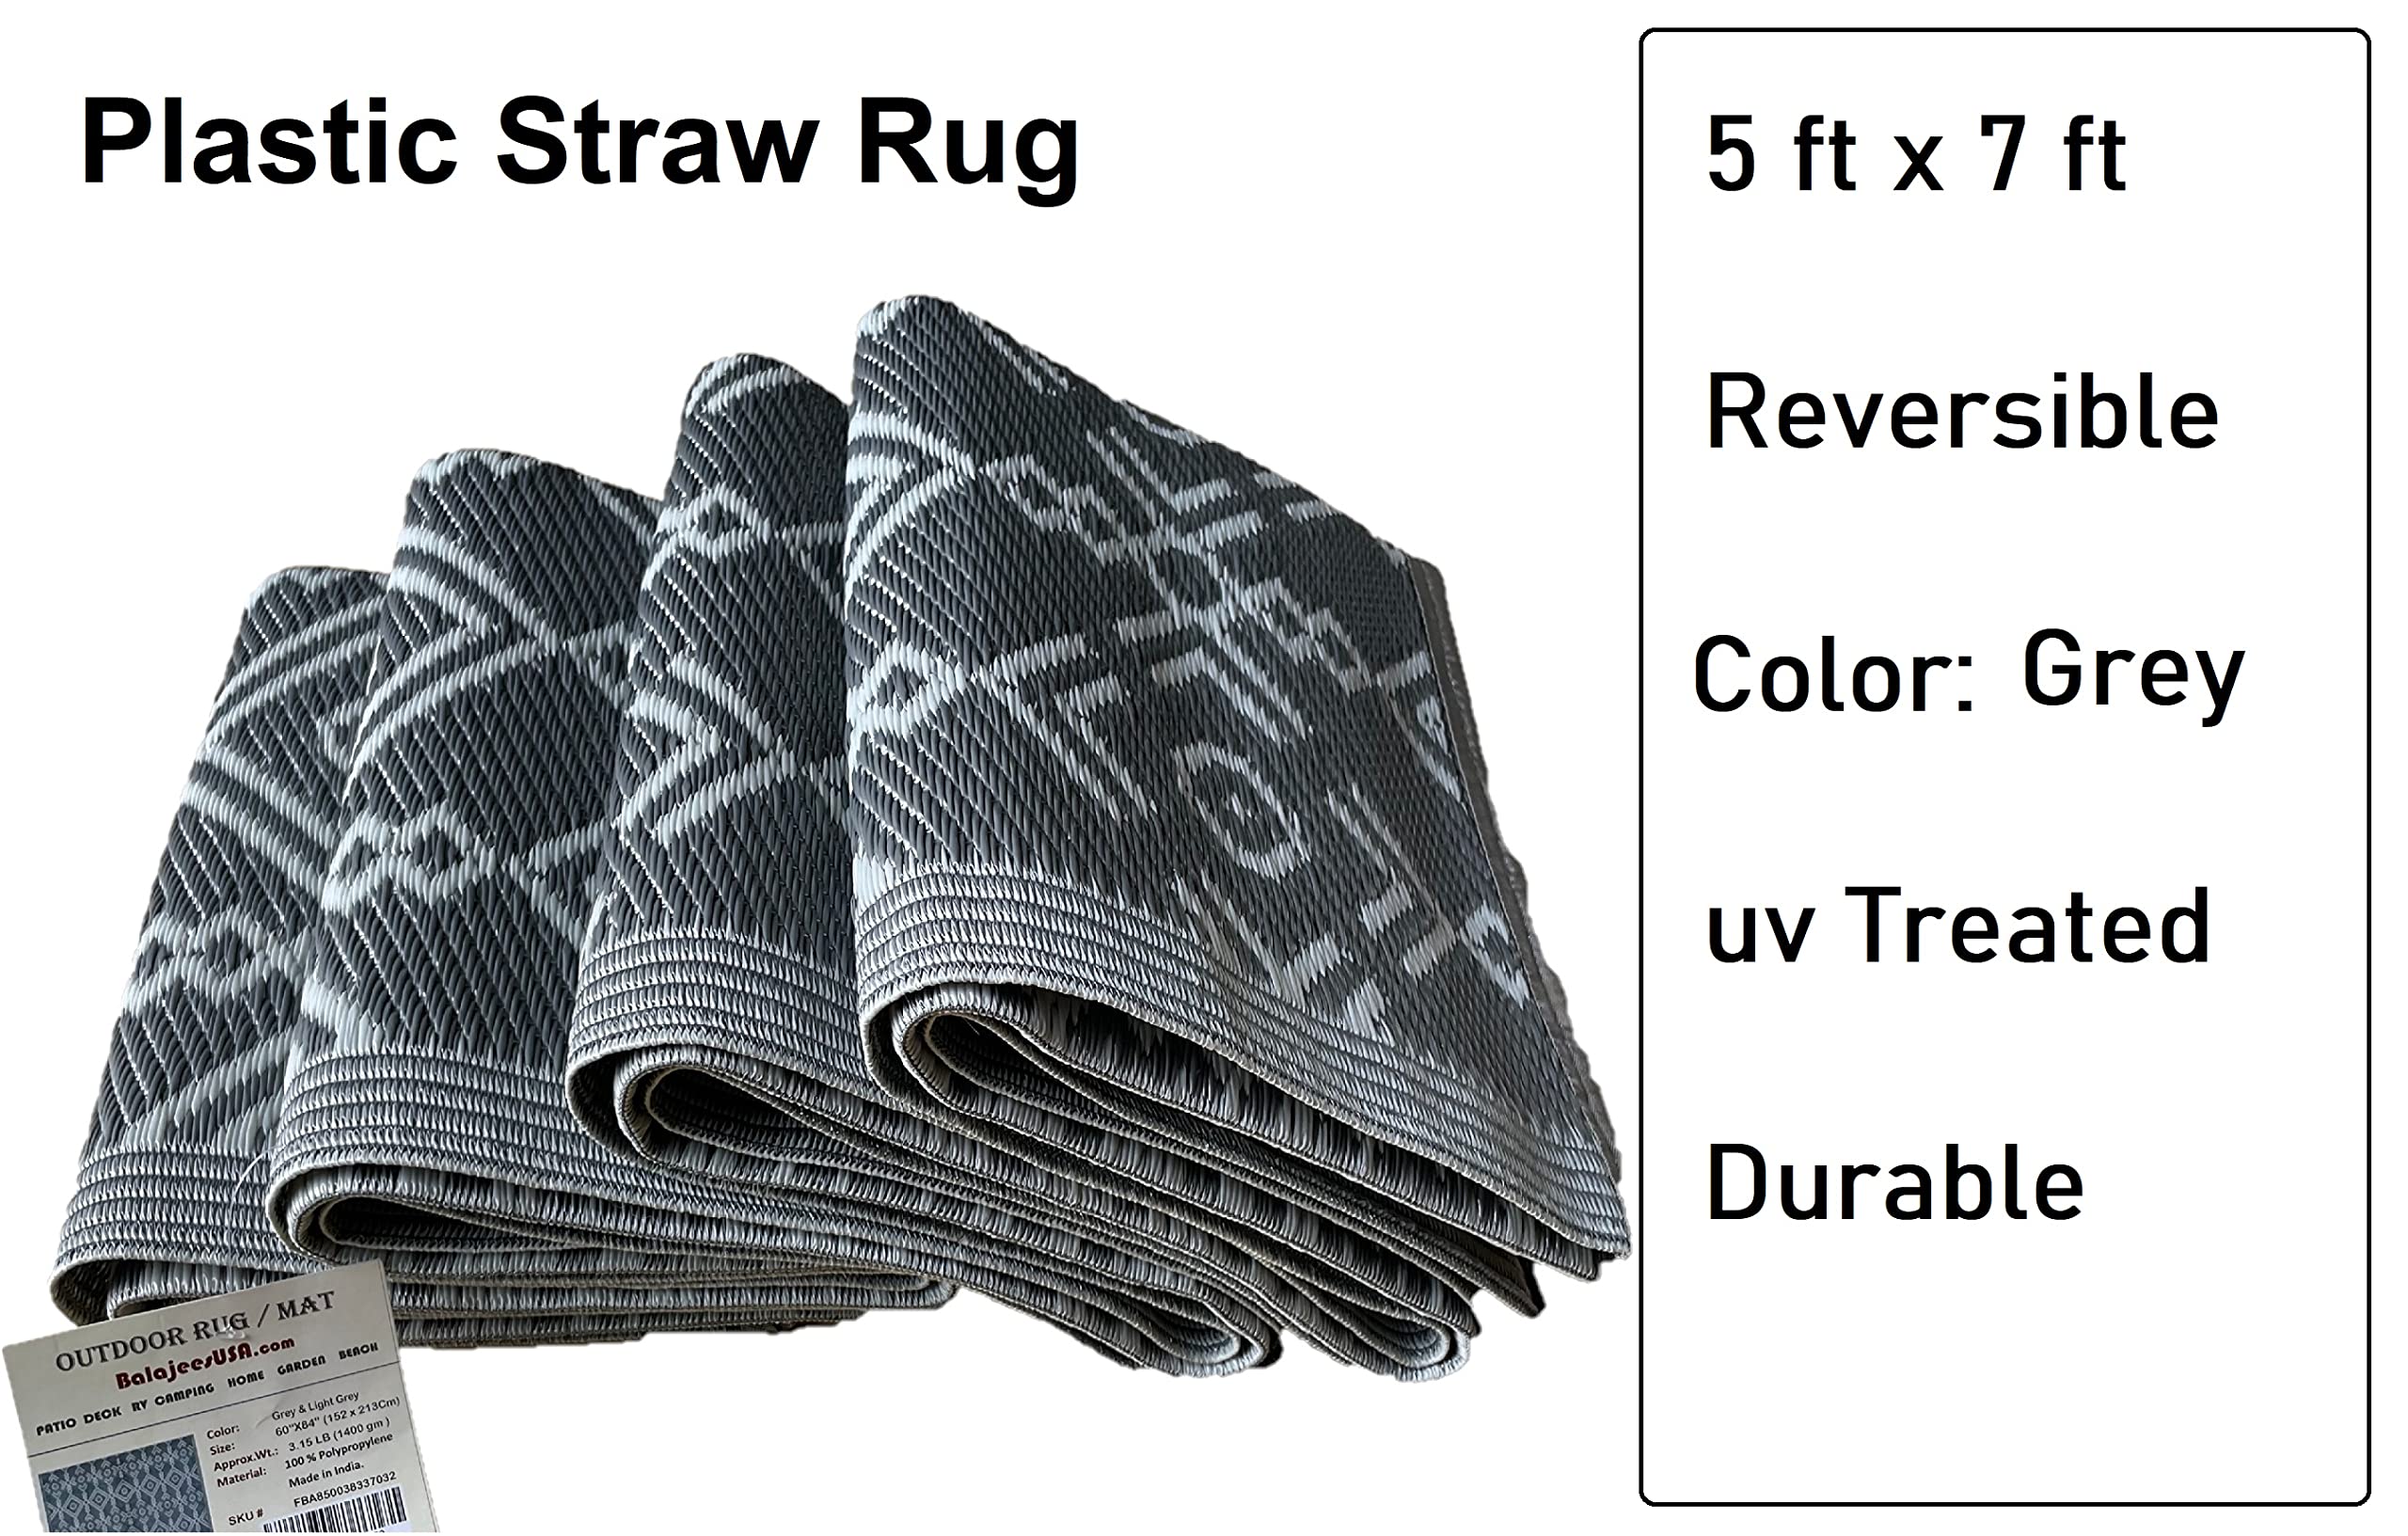 BalajeesUSA Outdoor Rug - 5x7 Grey Reversible Recycled Plastic Straw Patio Decor Waterproof Large RV Camper mat Camping 7032